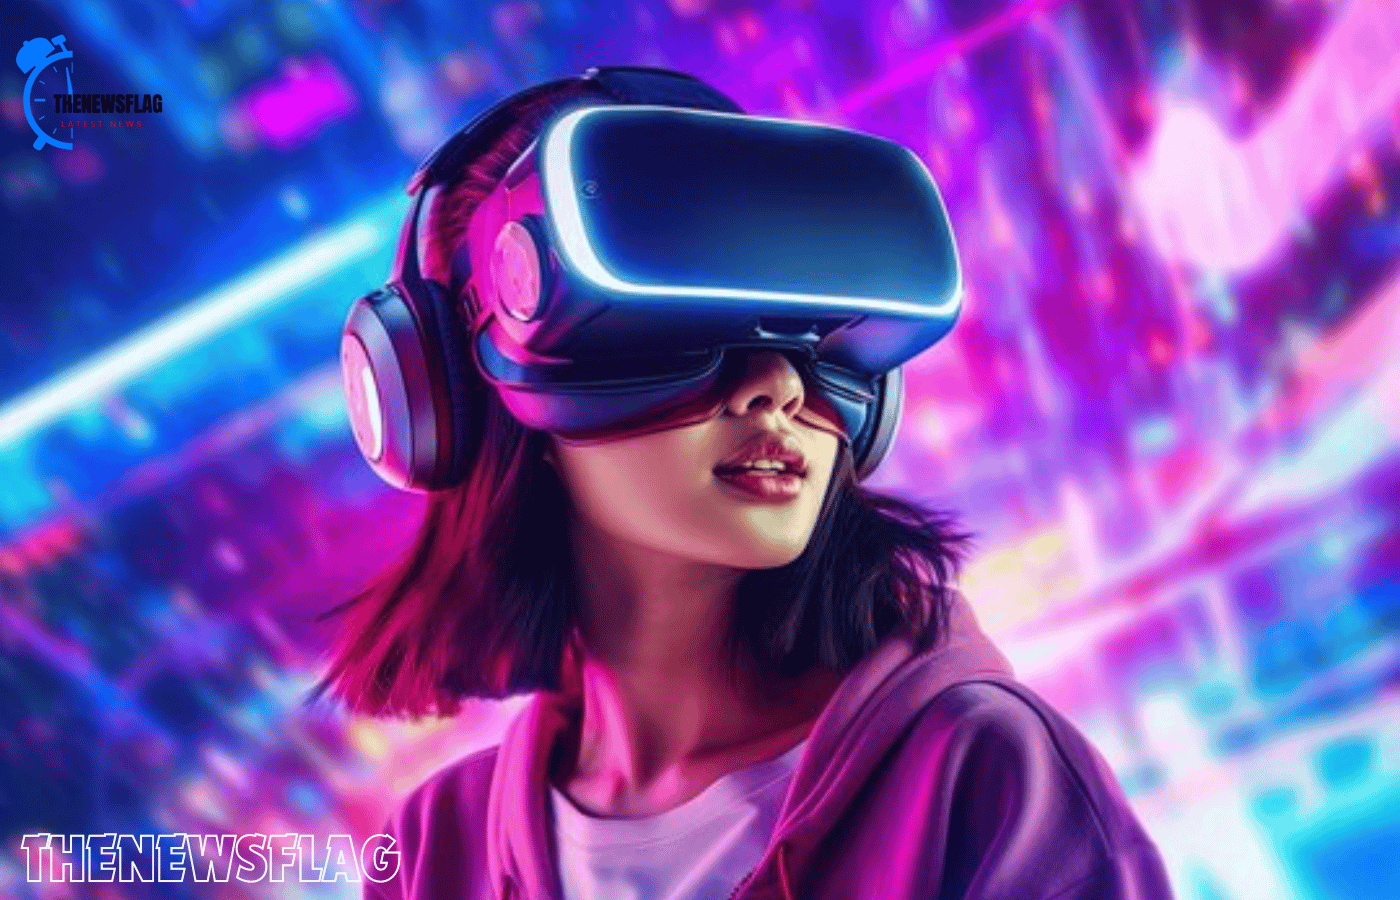 "Waifus" is brought to life via an AI-powered game with plans for an AR/VR experience.